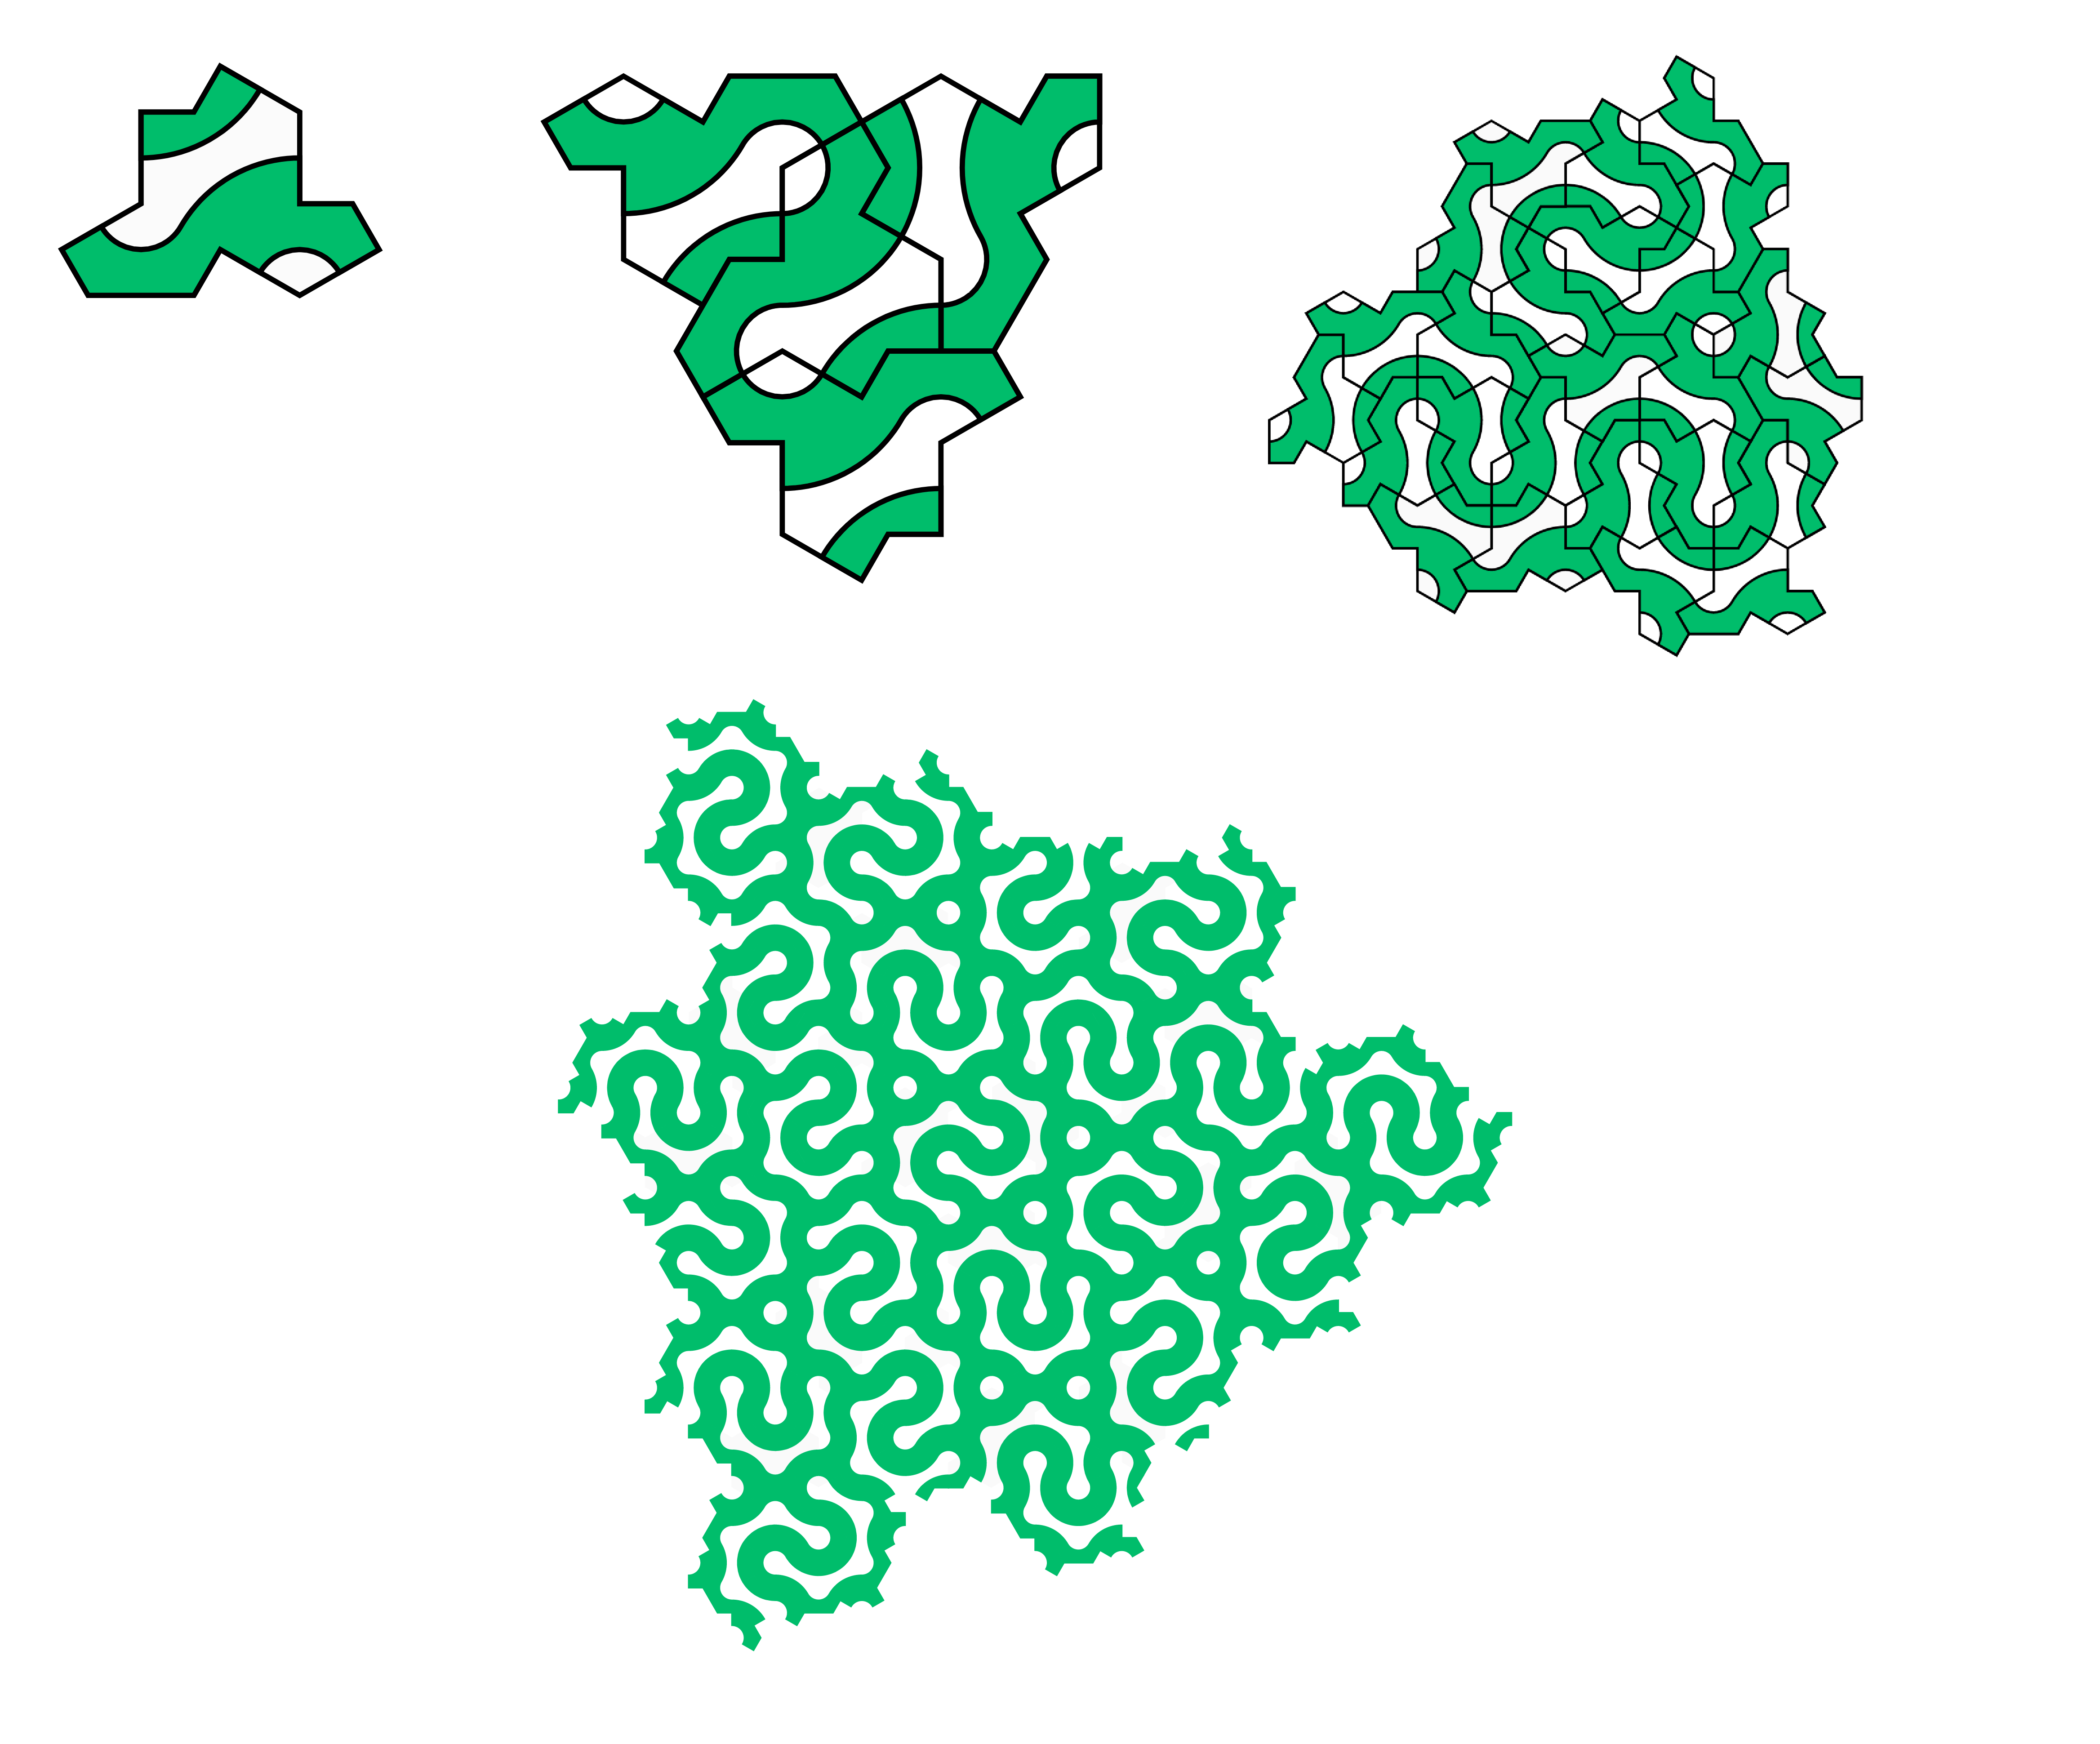 Progressively larger patches of the Truchet-style pattern.